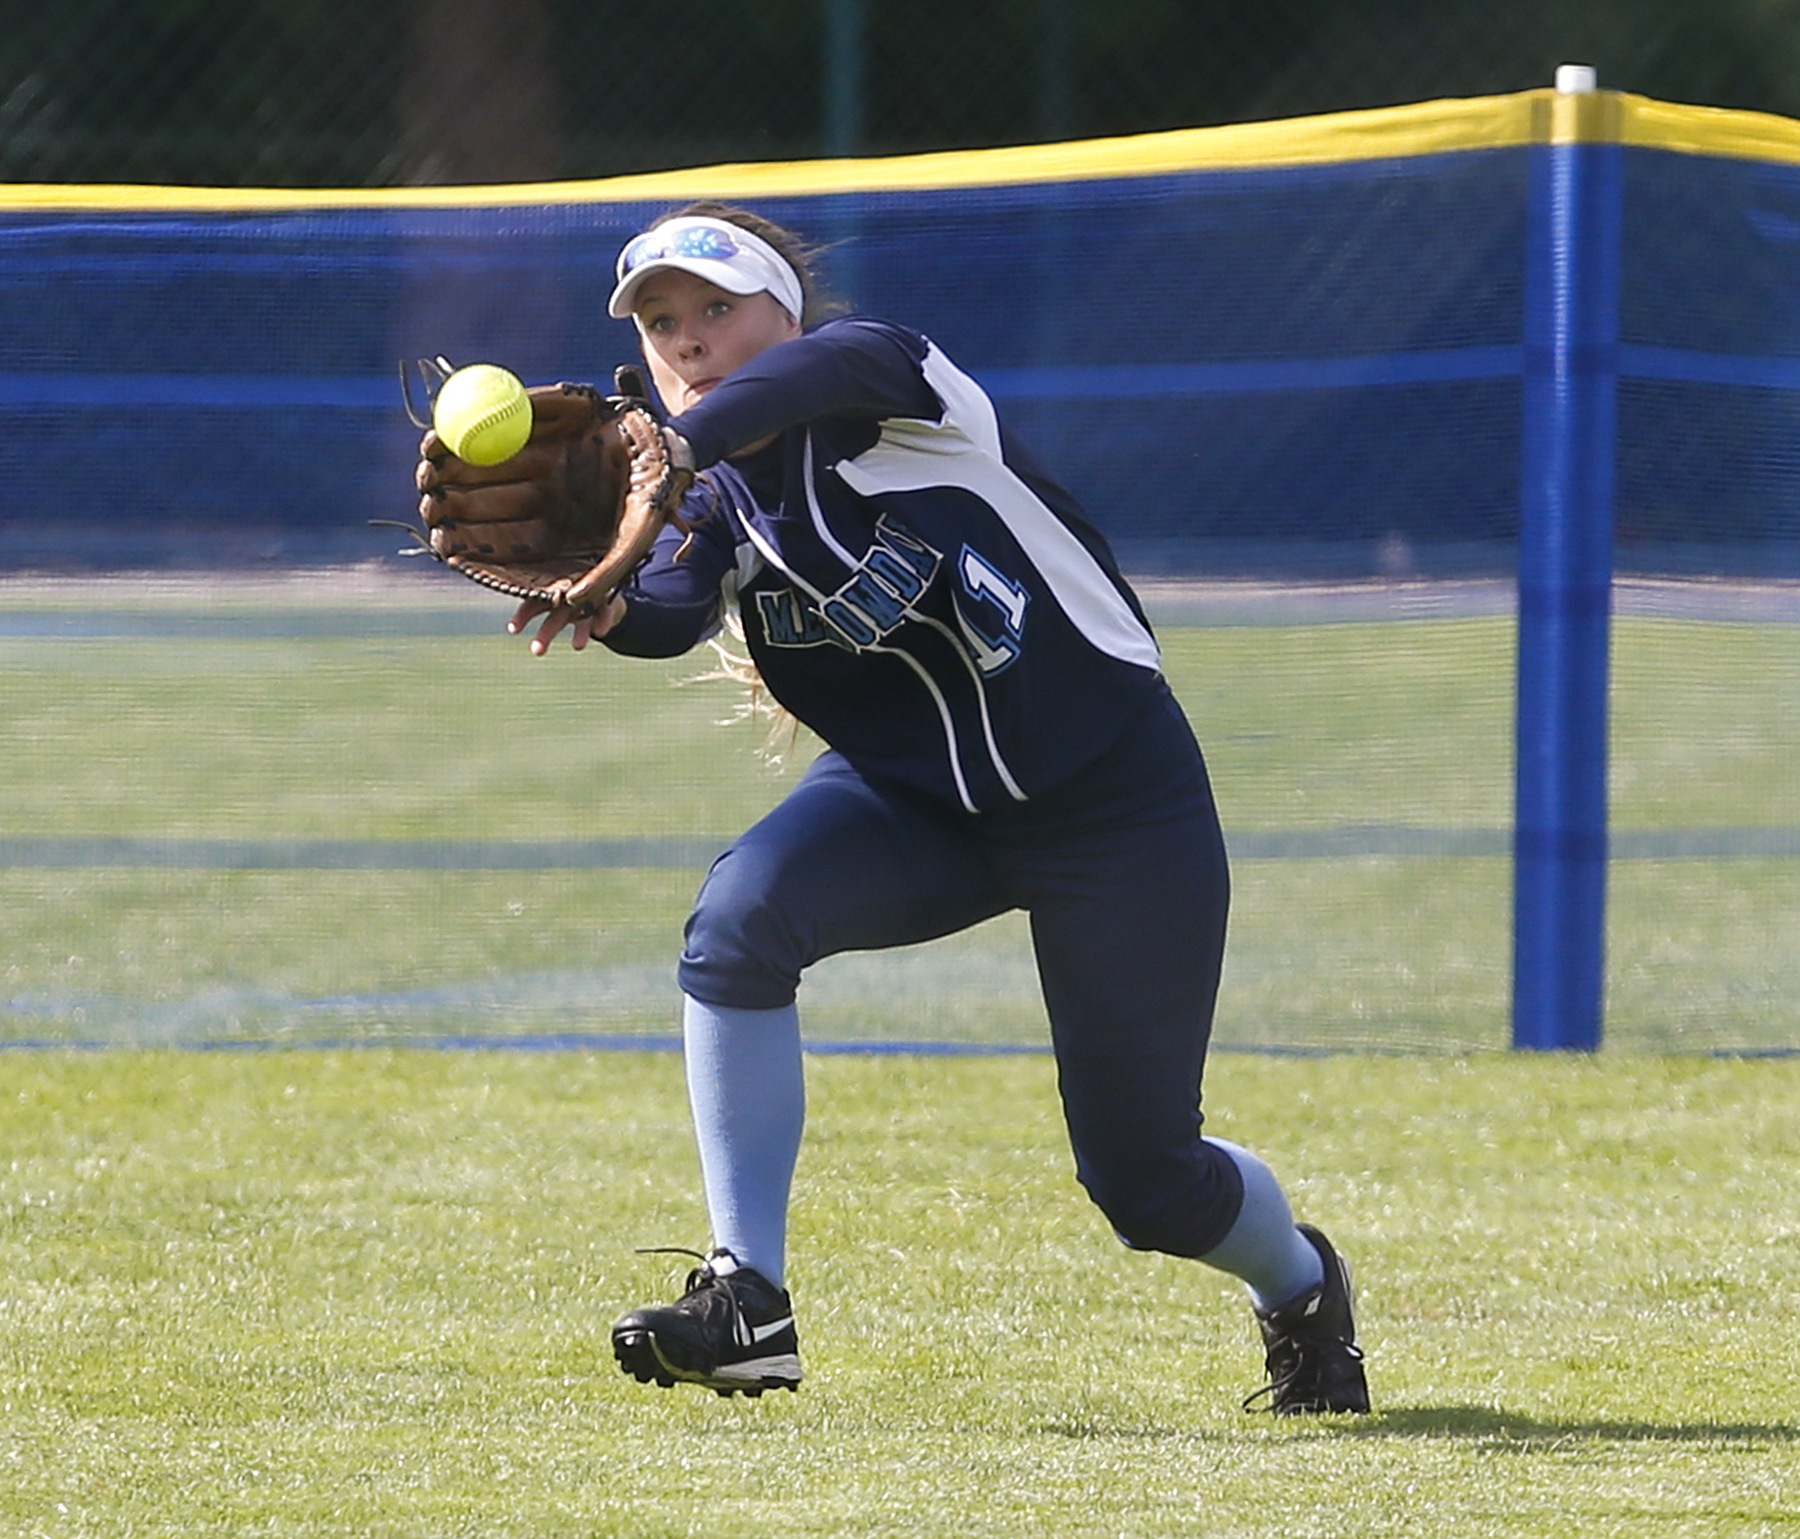 Meadowdale’s Kaitlyn Webster makes a running catch in center field during a first round game against Bainbridge at the 3A Washington State Softball Championships in Lacey on Friday, May 27, 2016. Meadowdale went on to win 4-0.